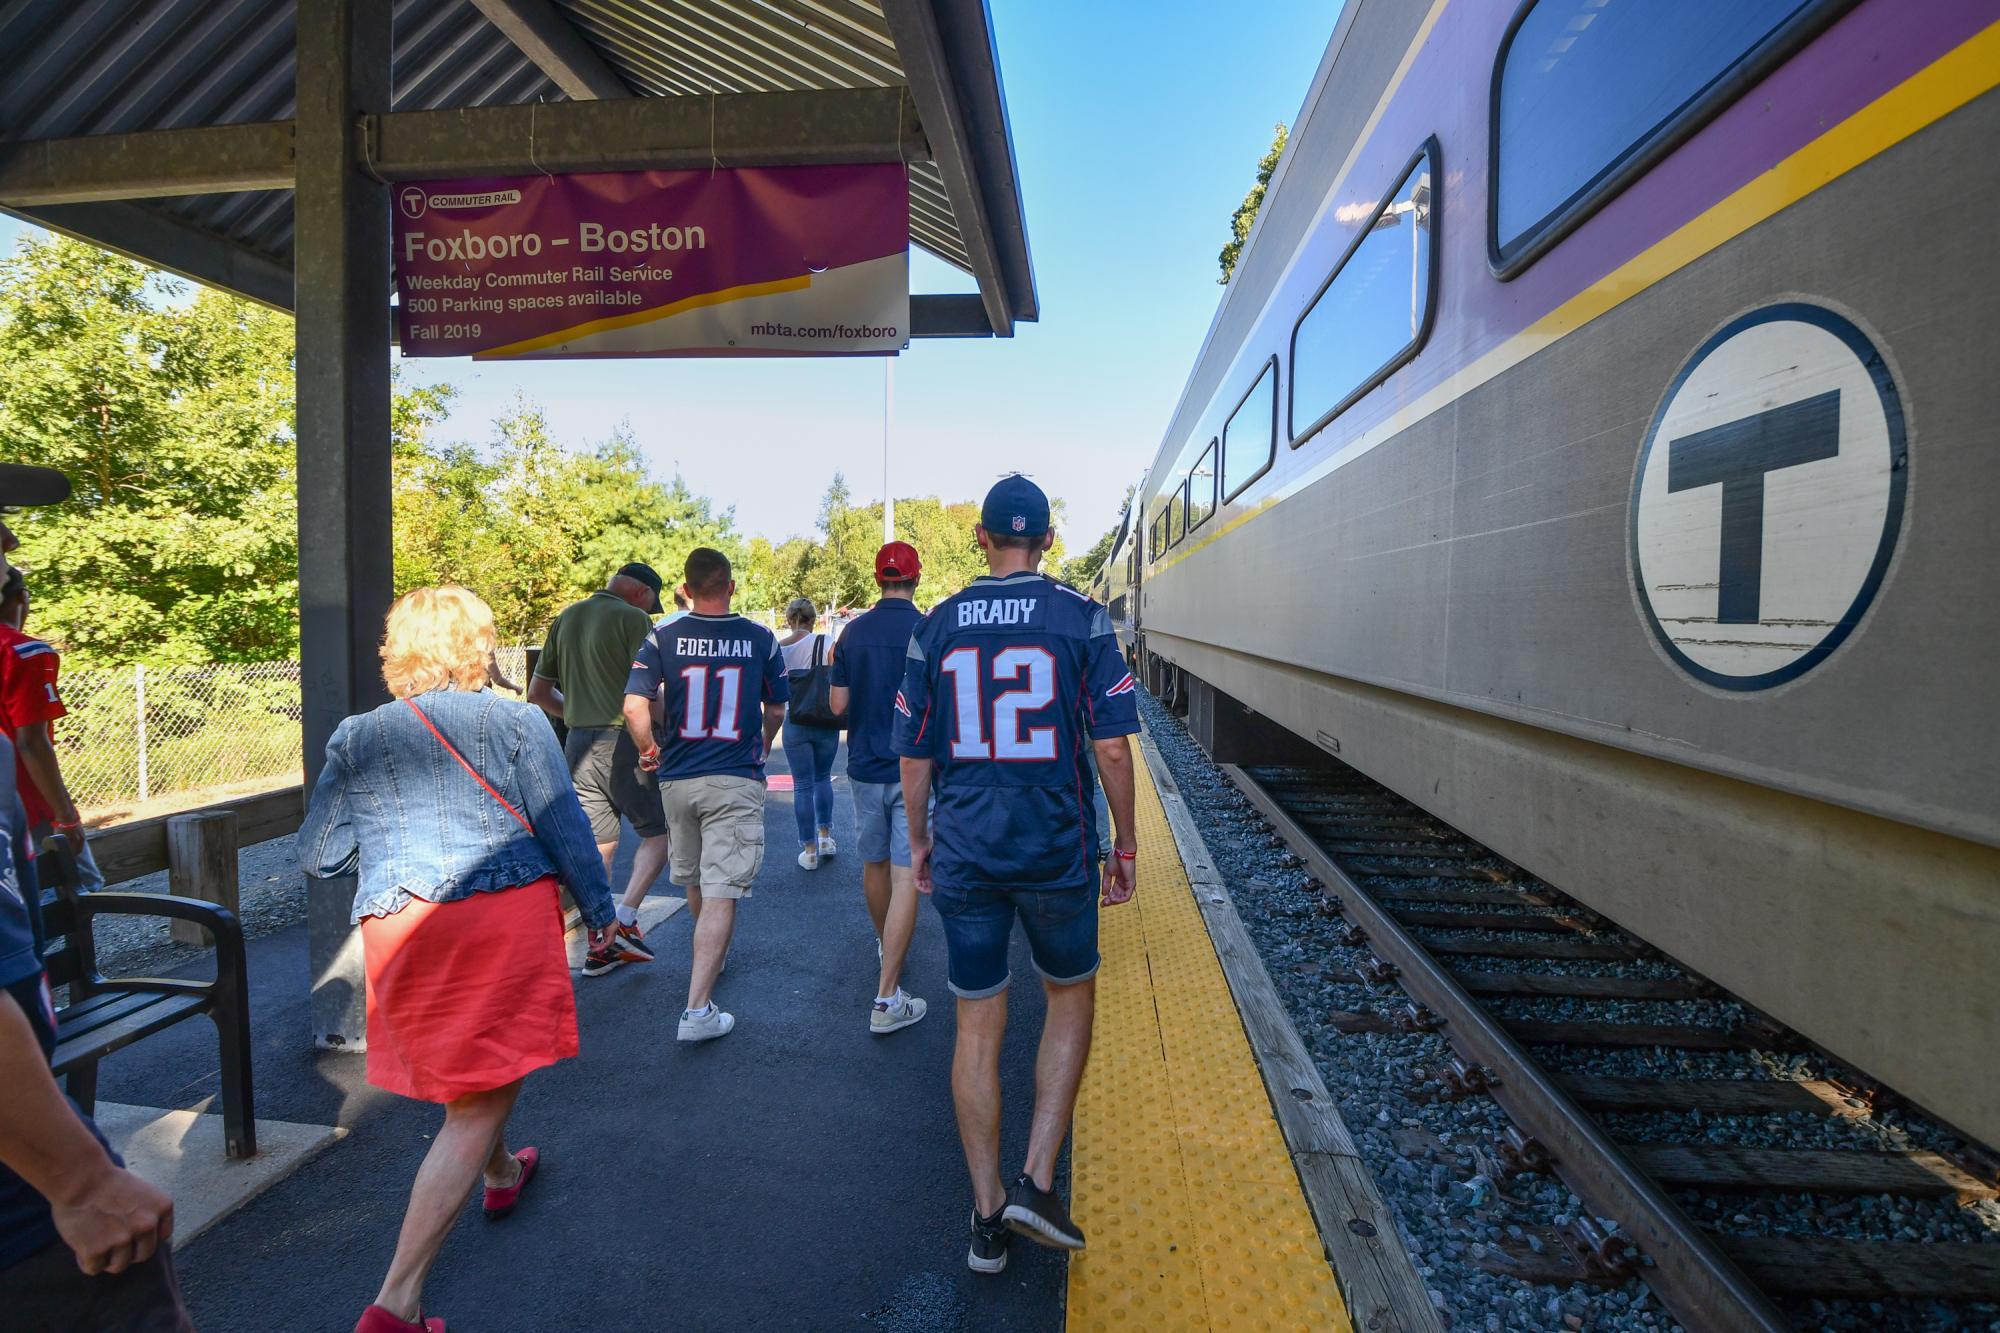 At Foxboro Station, riders with Patriots jerseys walk on the platform, passing by the Commuter Rail train.